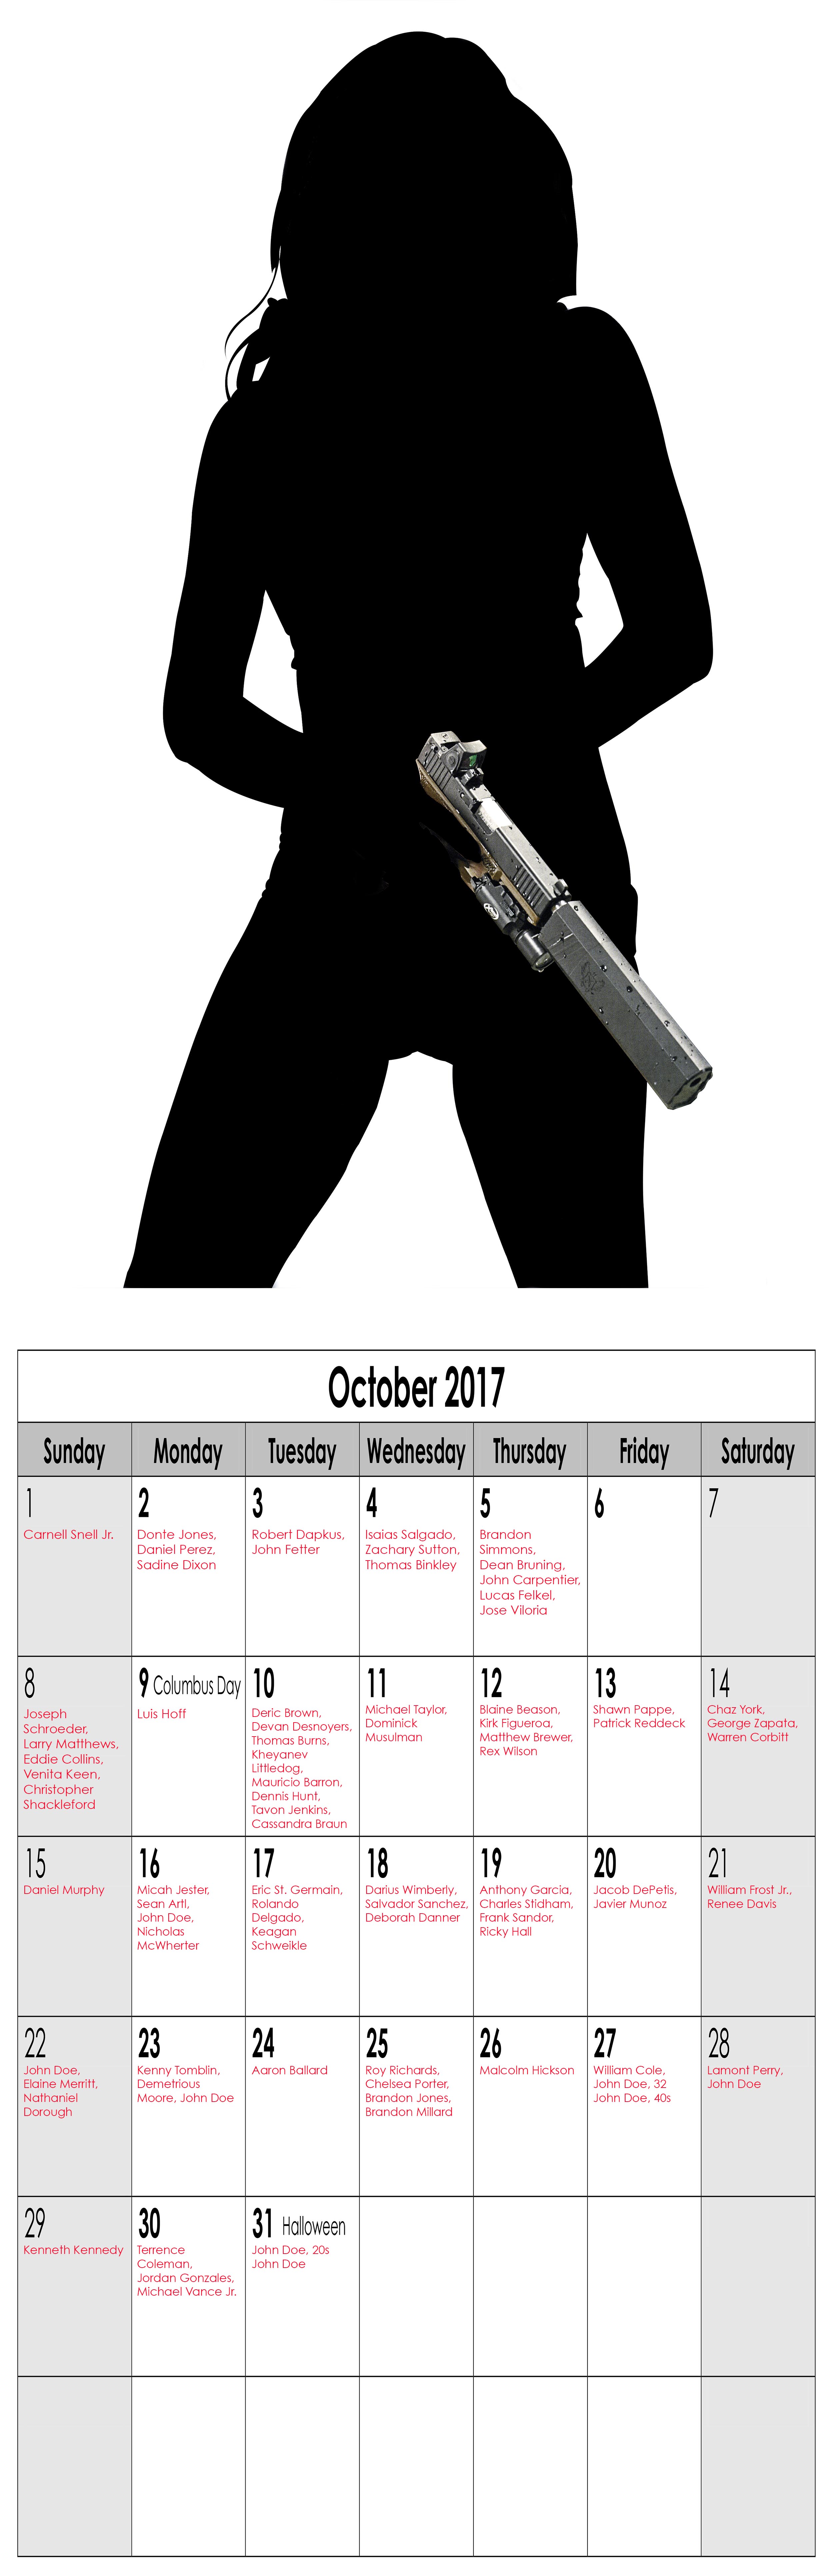 Year in Review (Miss October), 2016, Archival Pigment Print, 11"x34"